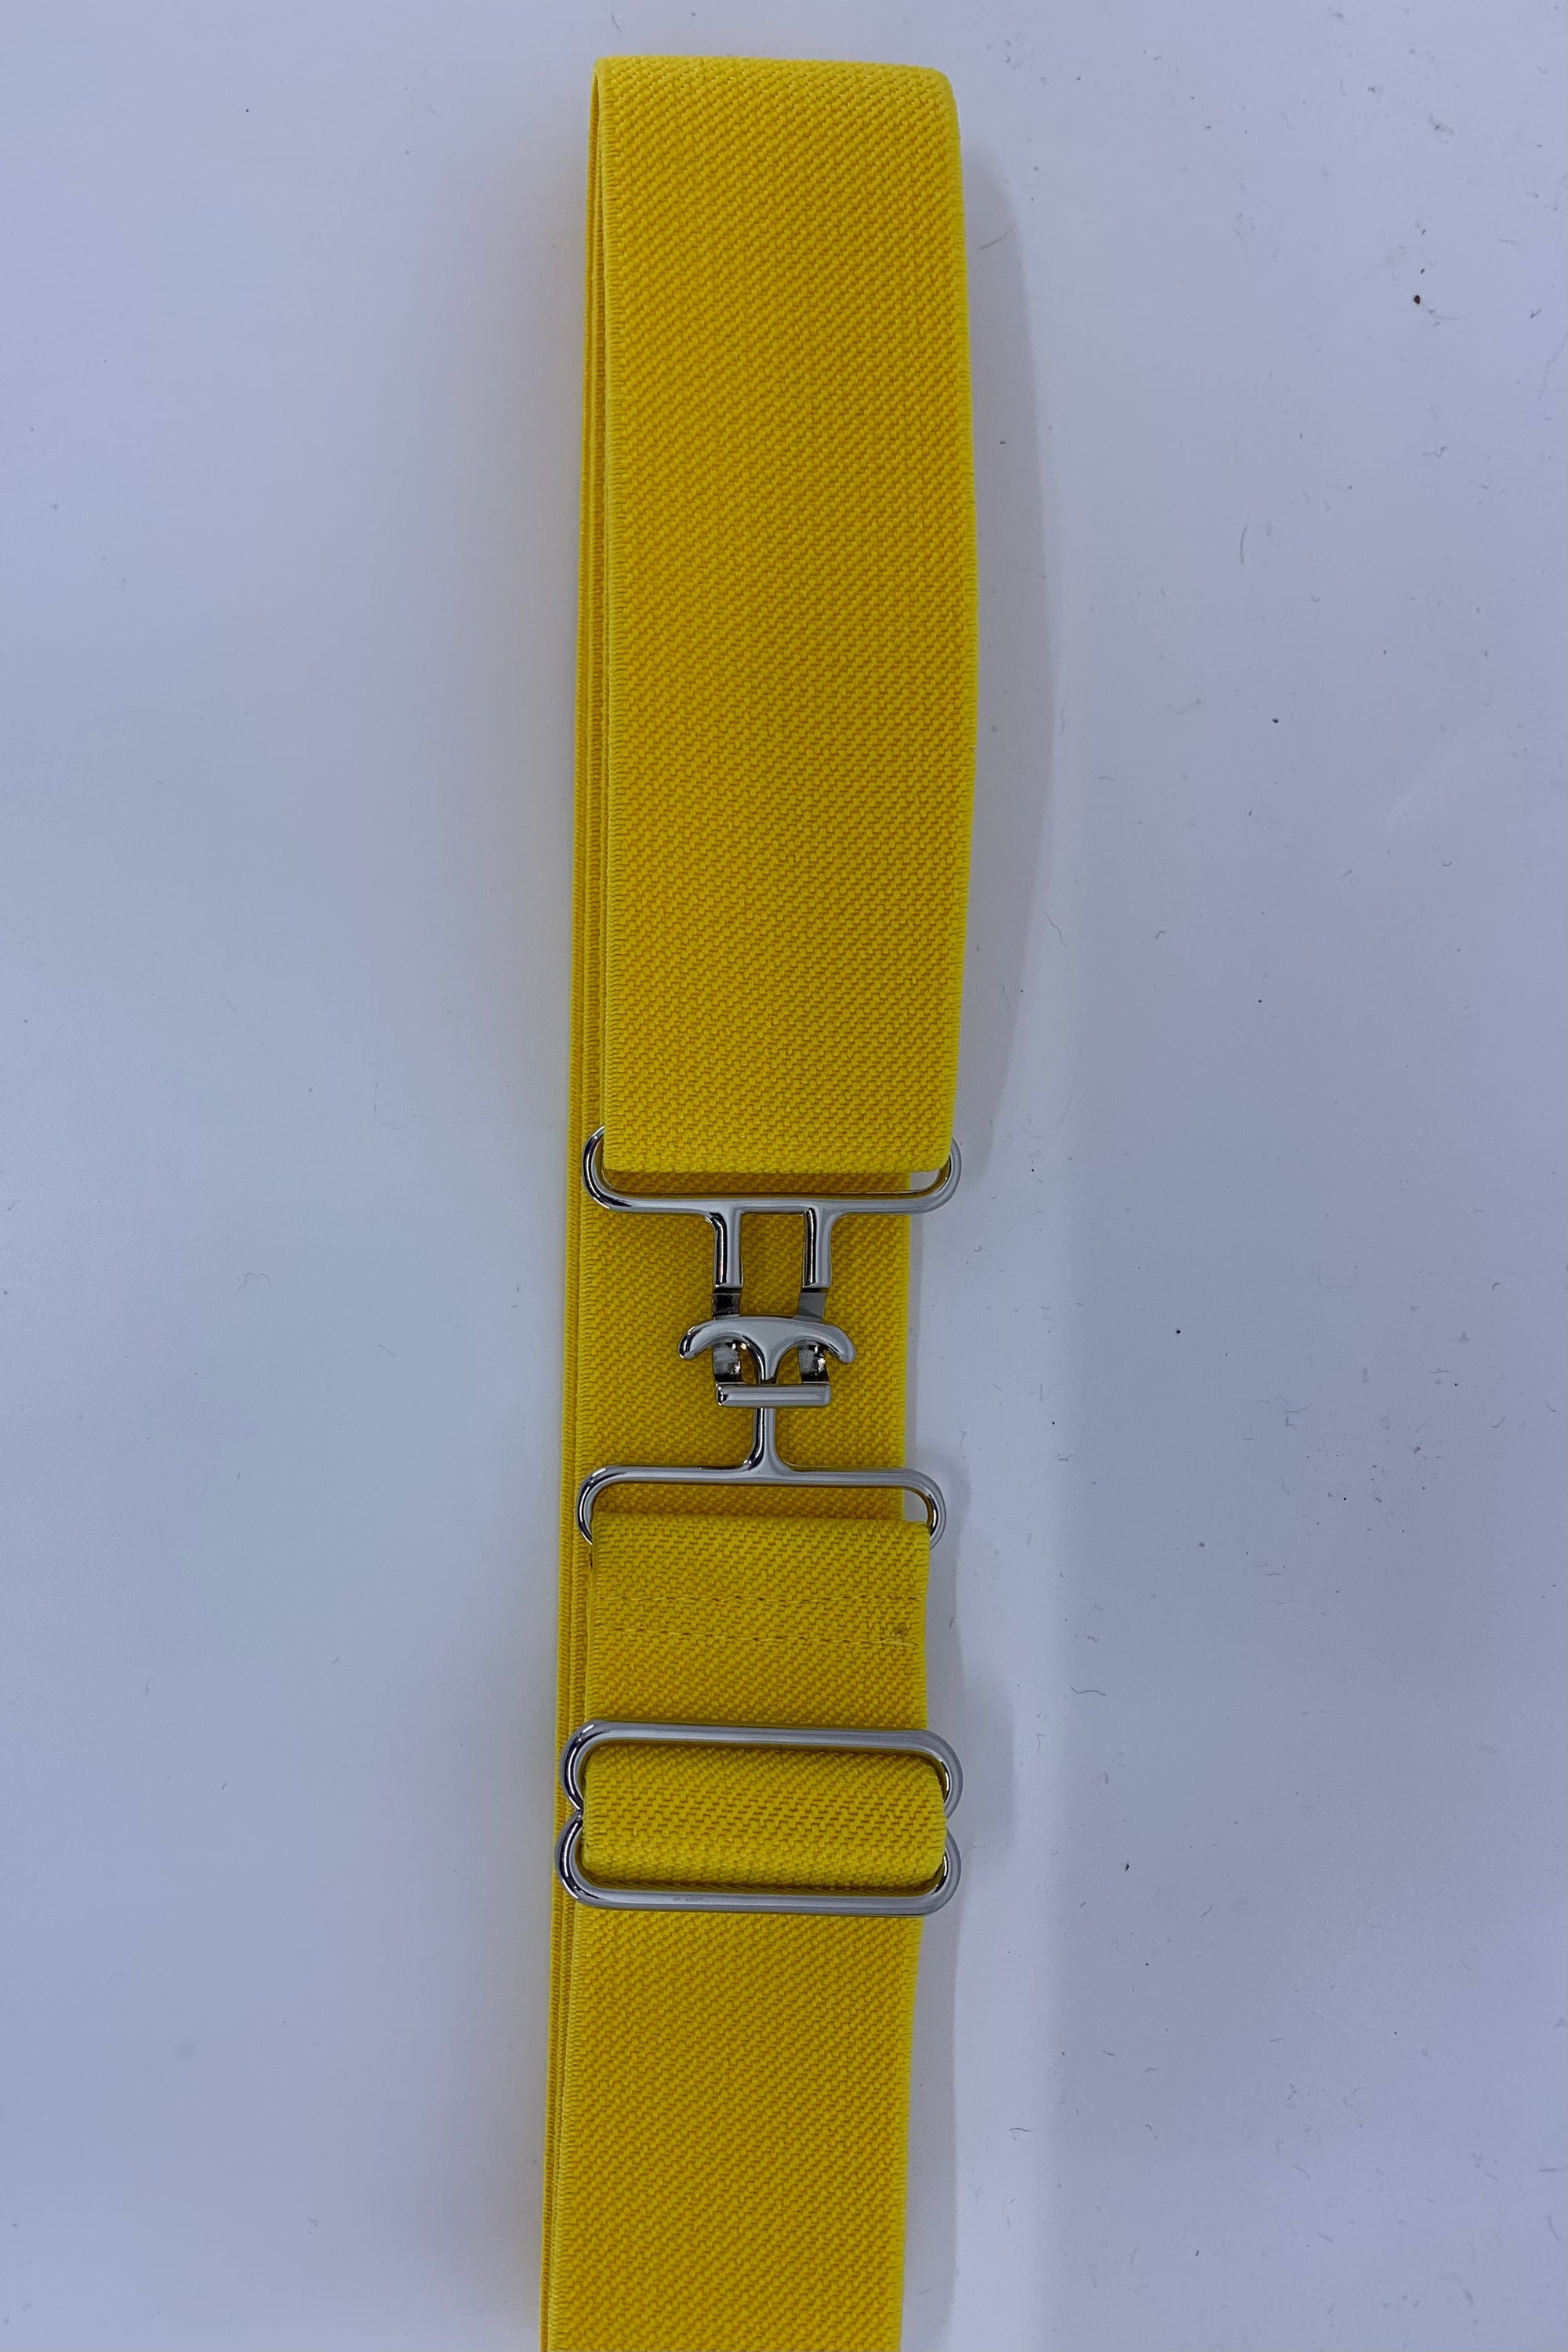 Pony Belts Co. Belt Stretch Belt 1.5" - Yellow equestrian team apparel online tack store mobile tack store custom farm apparel custom show stable clothing equestrian lifestyle horse show clothing riding clothes horses equestrian tack store